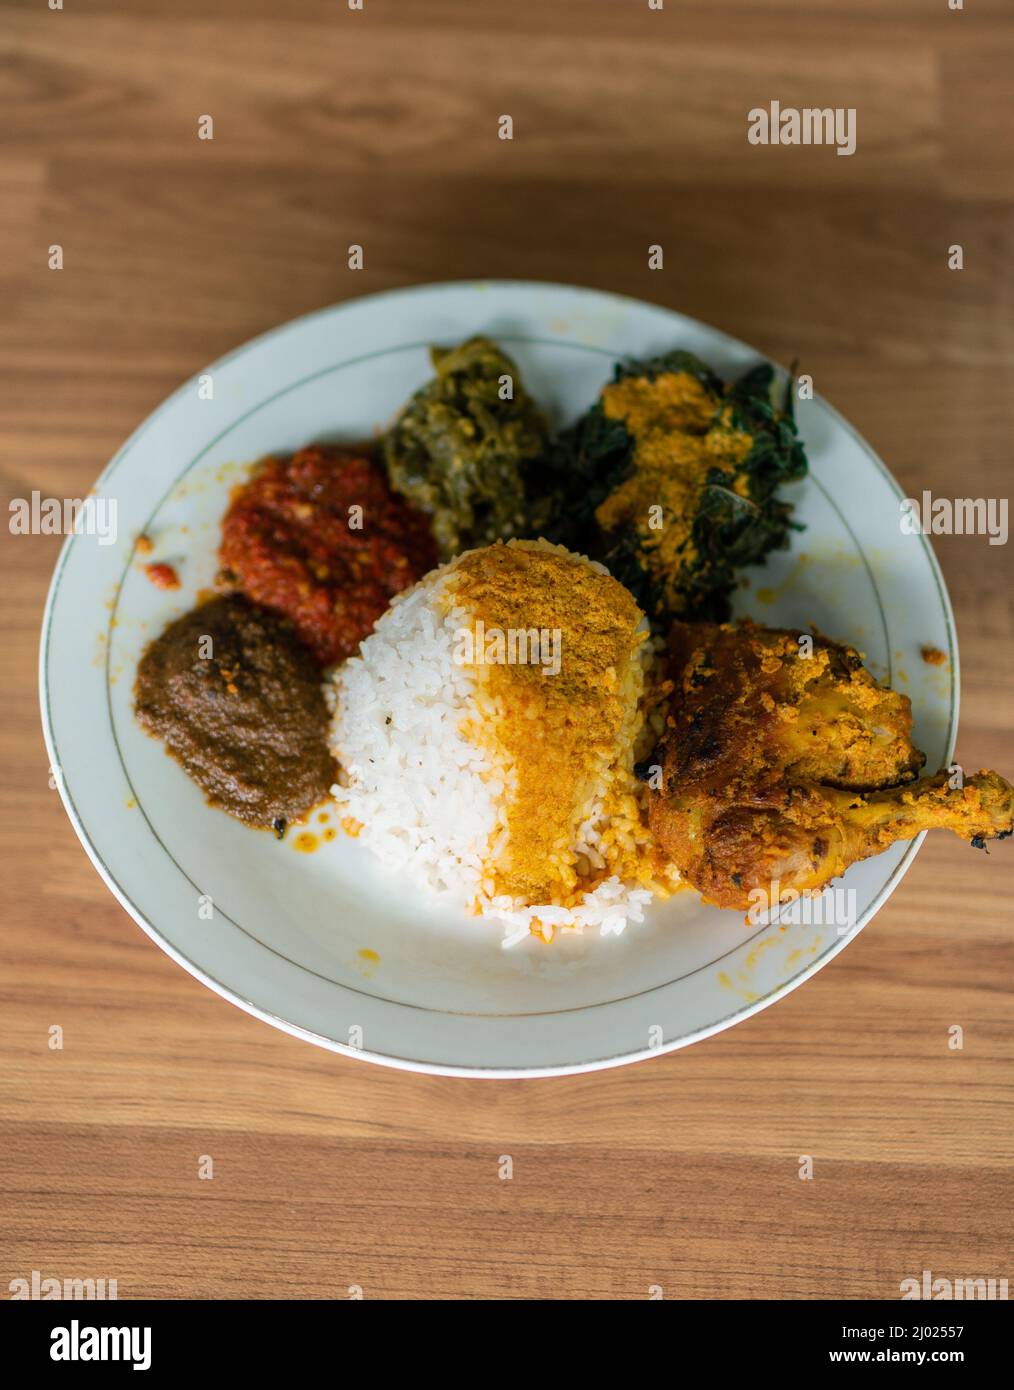 indonesian traditional food with rendang and fried chiken Stock Photo